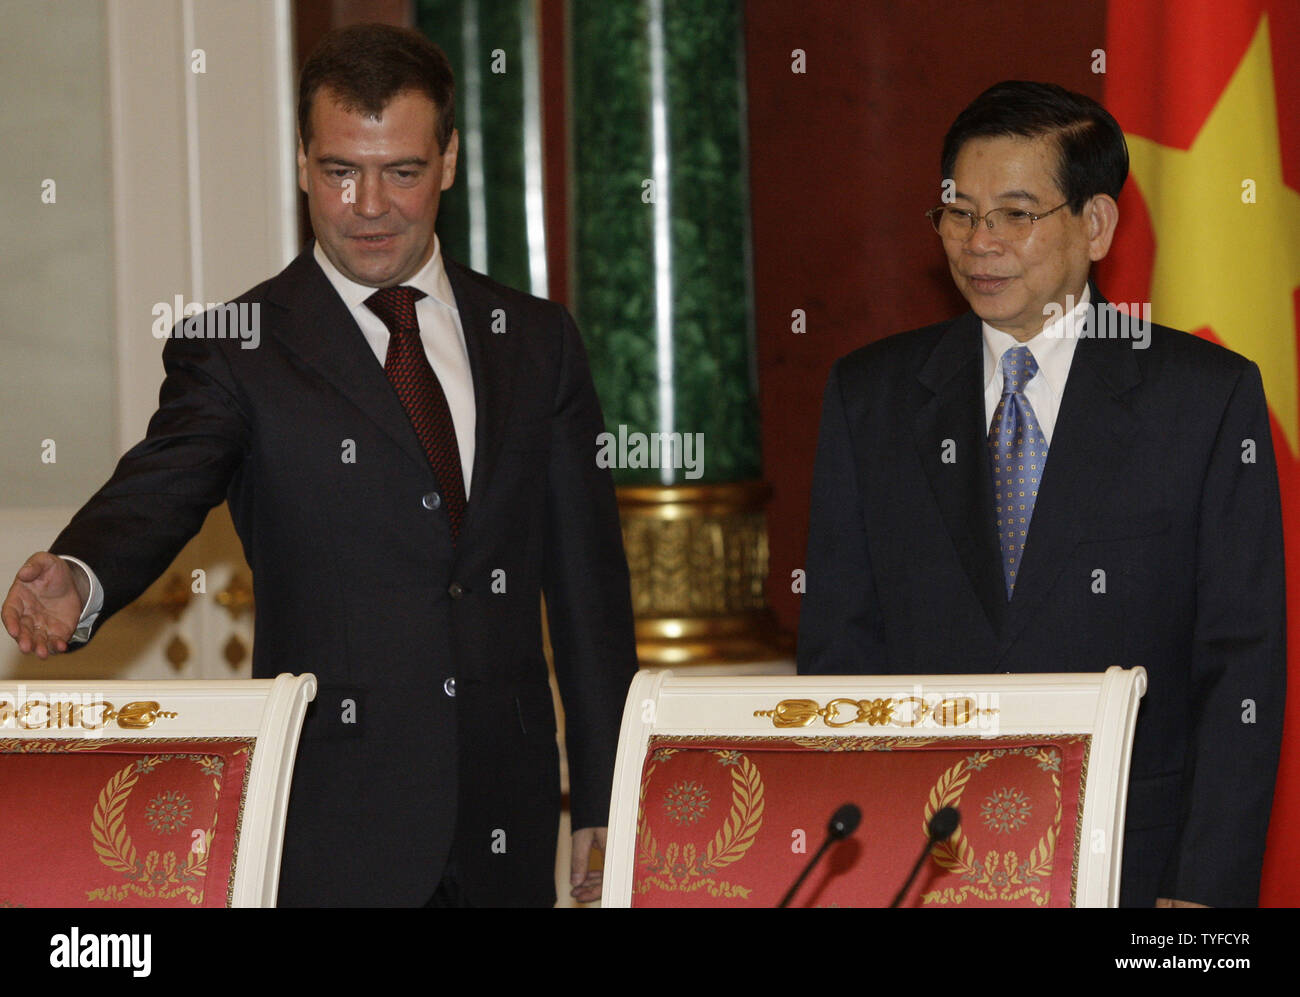 Russian President Dmitry Medvedev (L) welcomes Vietnamese counterpart Nguyen Minh Triet before their meeting in the Kremlin in Moscow on October 27, 2008. Russia and Vietnam agreed Monday to boost their energy cooperation and explore new prospective oil fields.(UPI Photo/Anatoli Zhdanov) Stock Photo